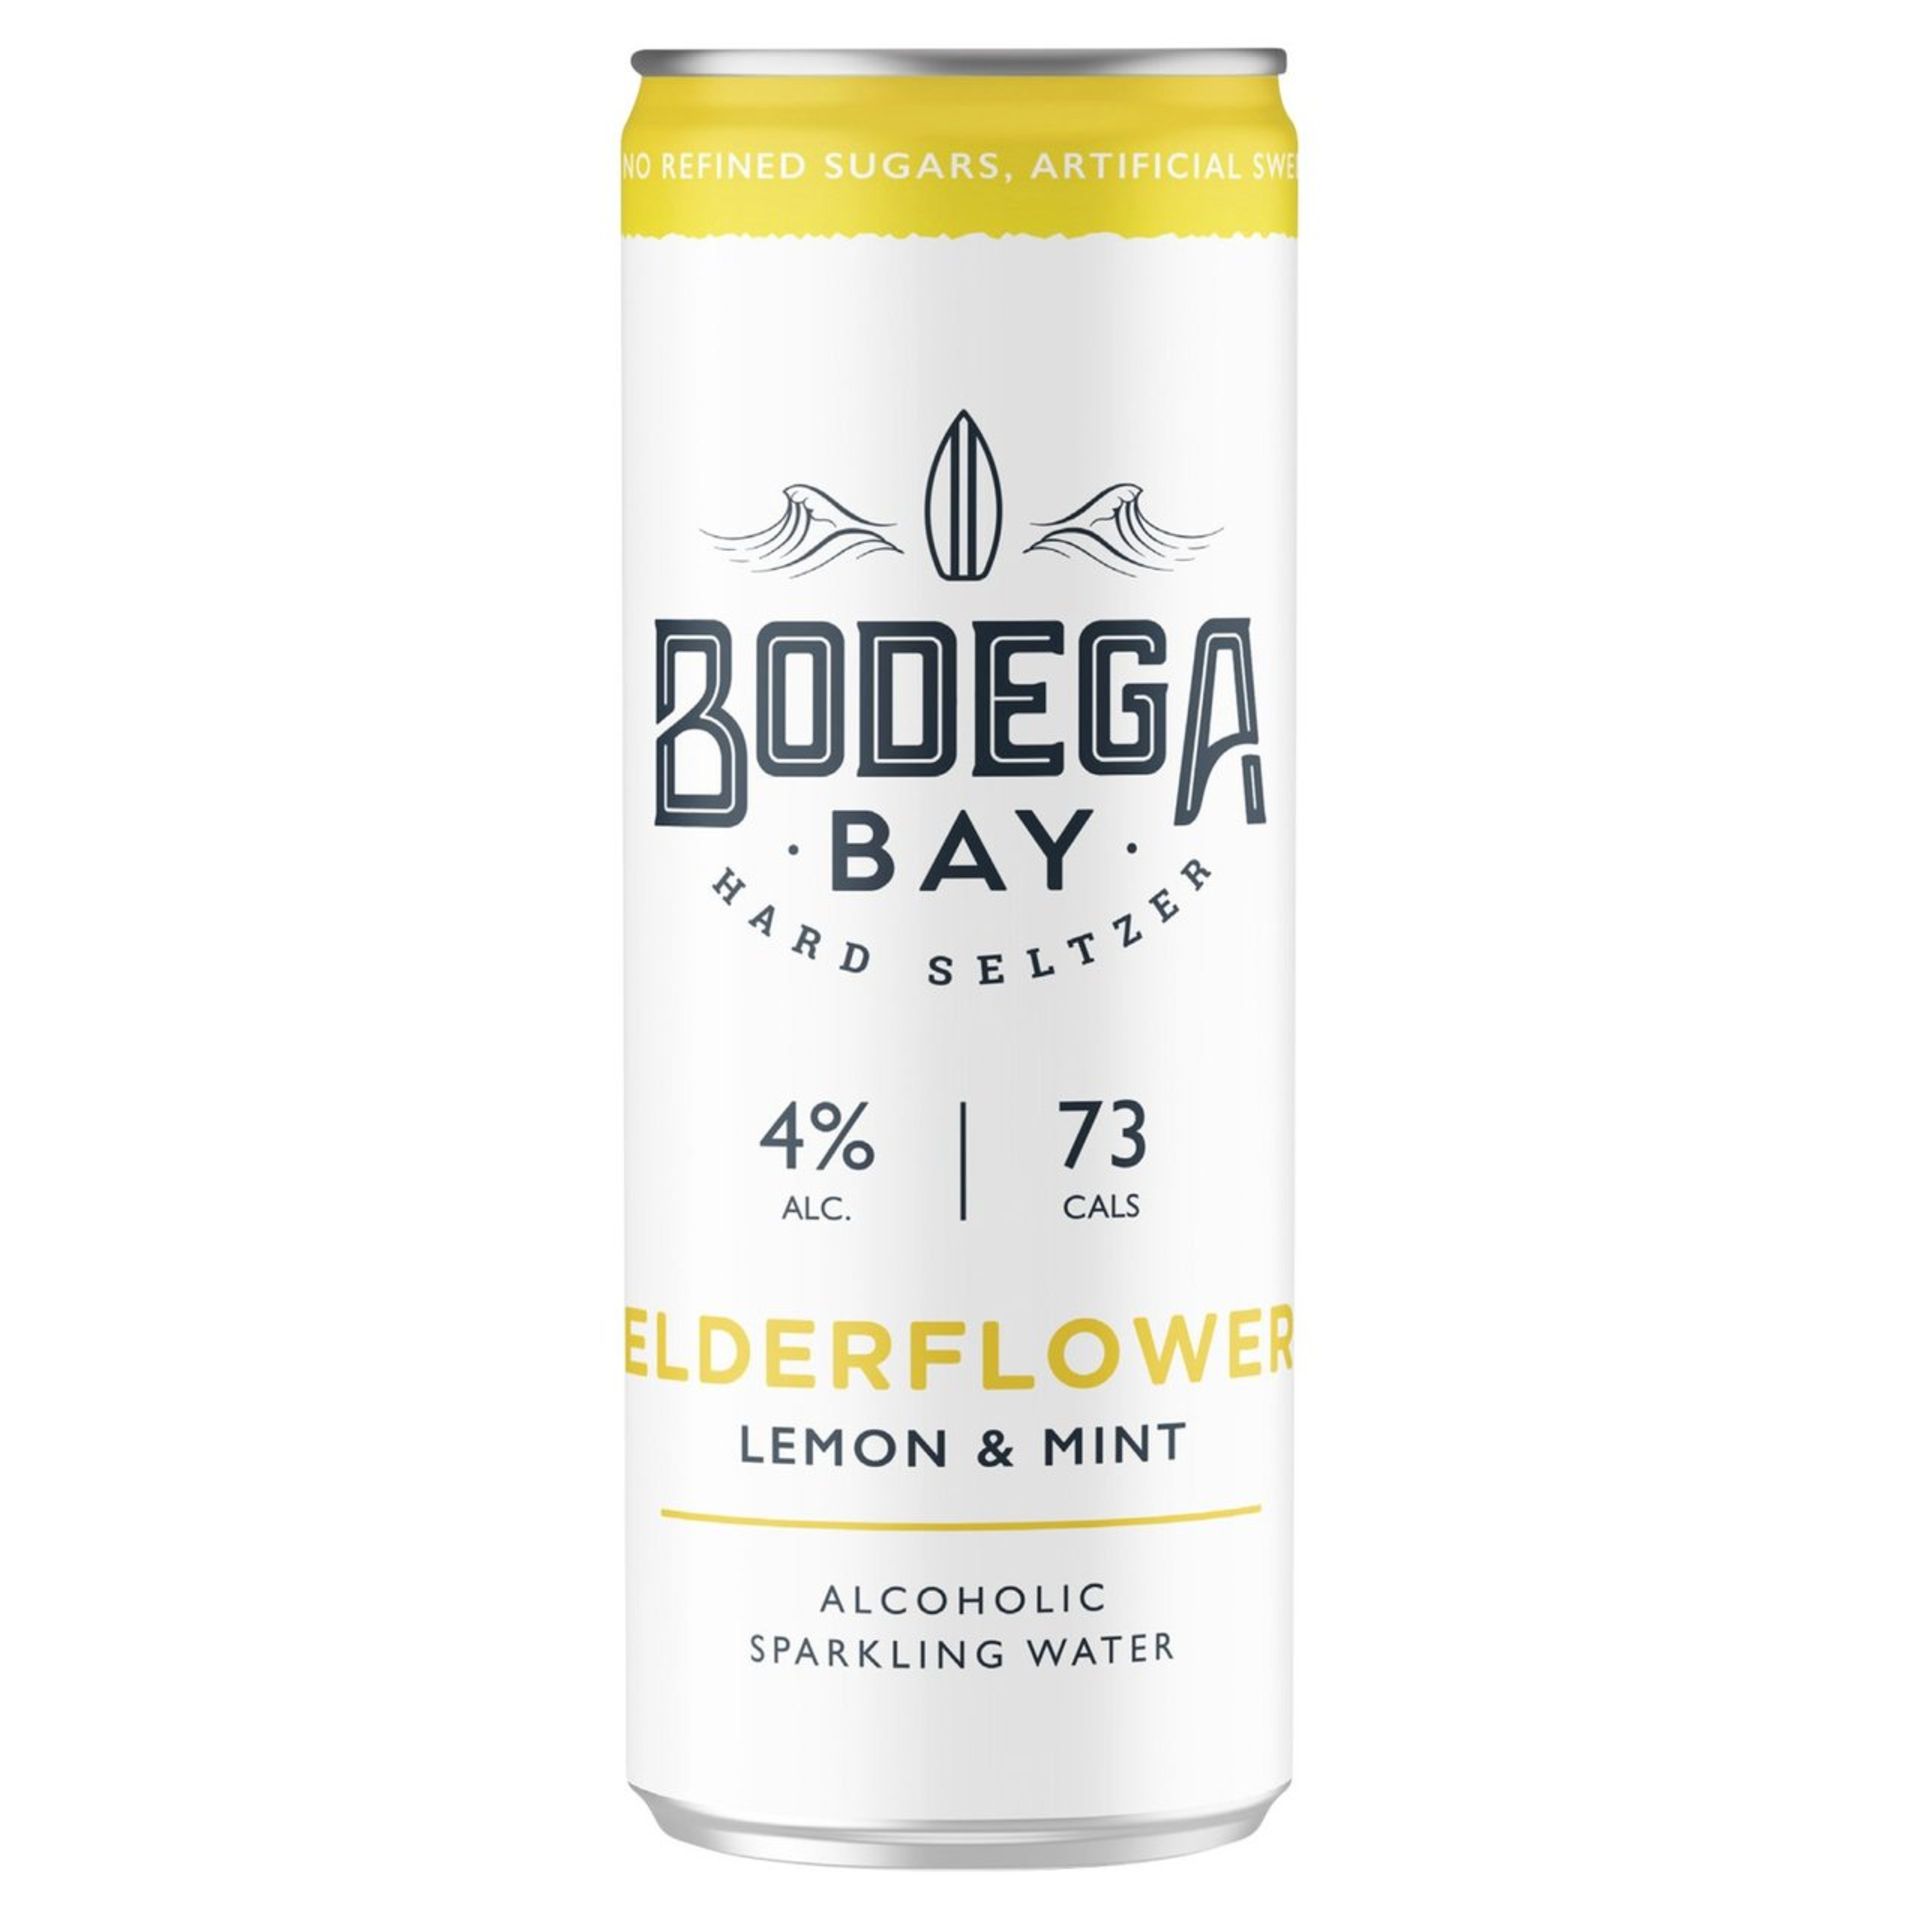 360 x Cans of Bodega Bay Hard Seltzer 250ml Alcoholic Sparkling Water Drinks - Various Flavours - Image 4 of 15